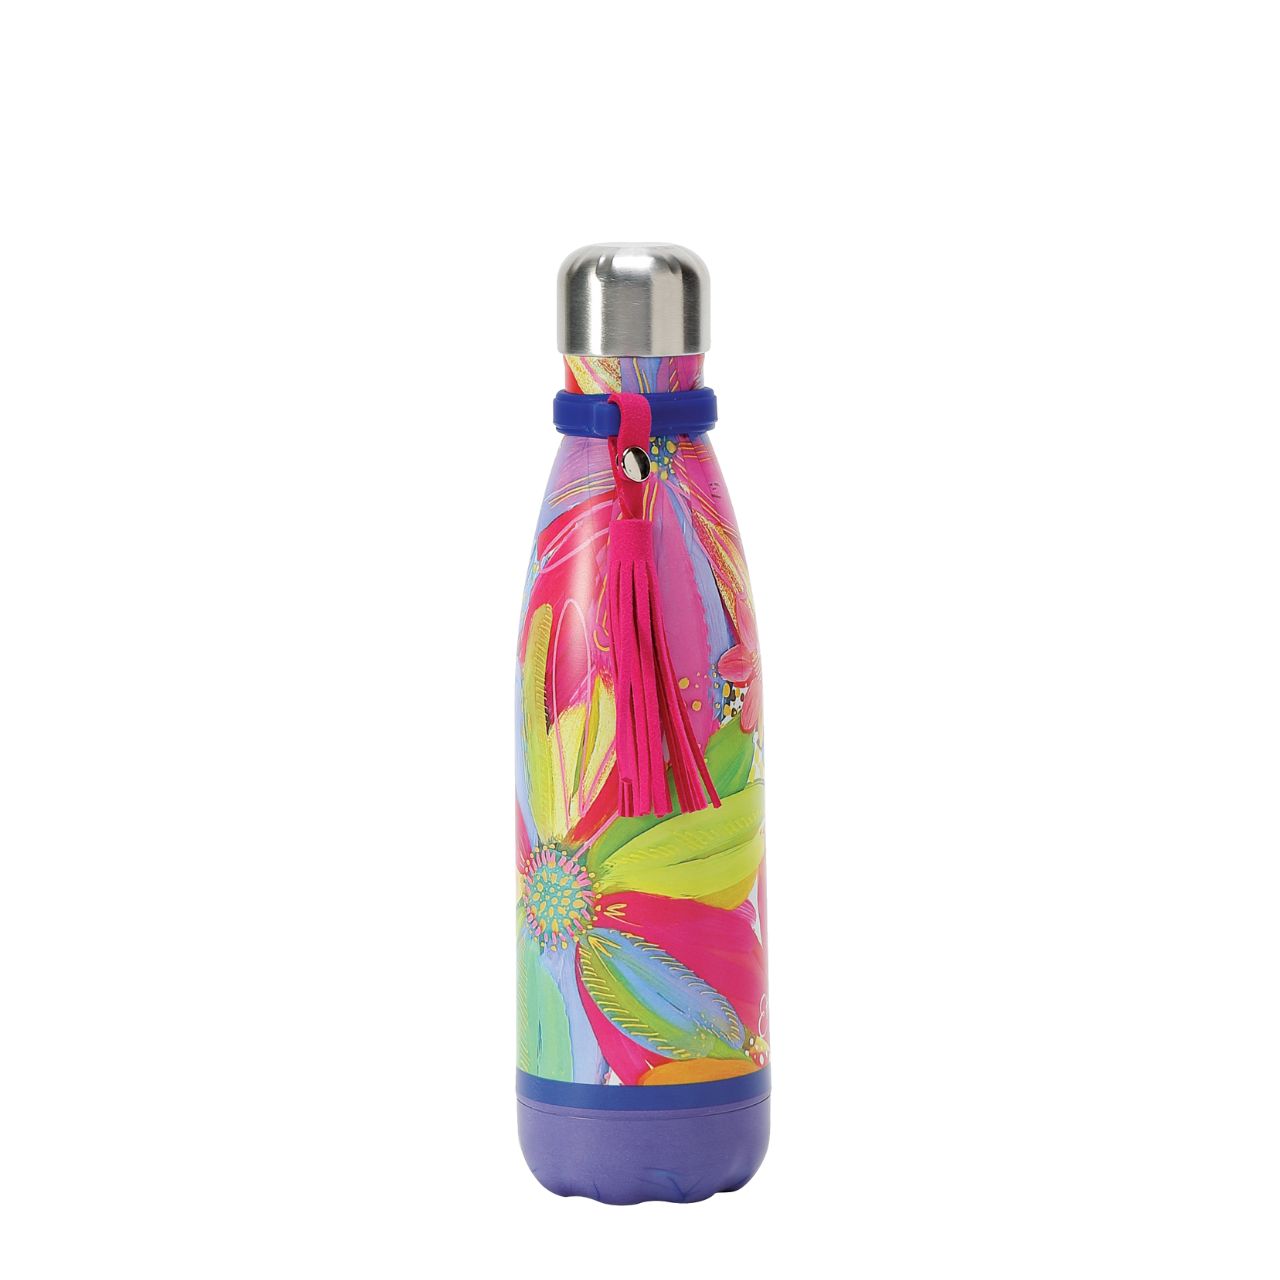 Etta Vee Jessi's Garden Water Bottle  Artist, designer and art influencer, Jessi Raulet, is known for her colourful and bold designs. This stainless steel water bottle features a wrap around design with colour blocked accents. The suede tassel is removeable for cleaning and this also comes in a gift box.